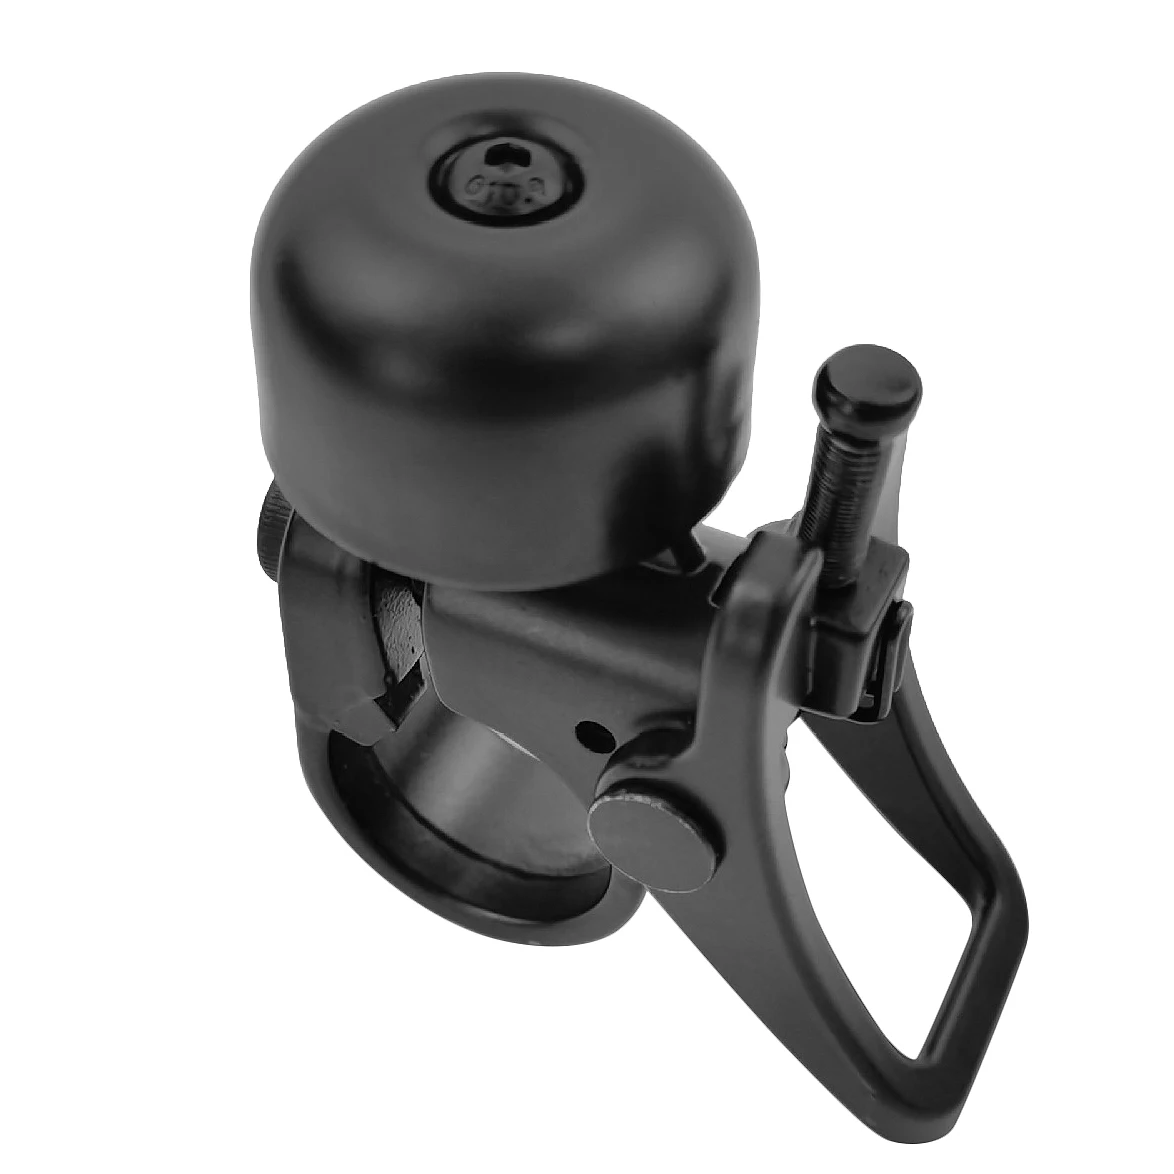 

Whole Body Aluminum Alloy Scooter Bell Horn Ring with Quick Release Mount for Xiaomi M365 Pro 1S Electric Scooter